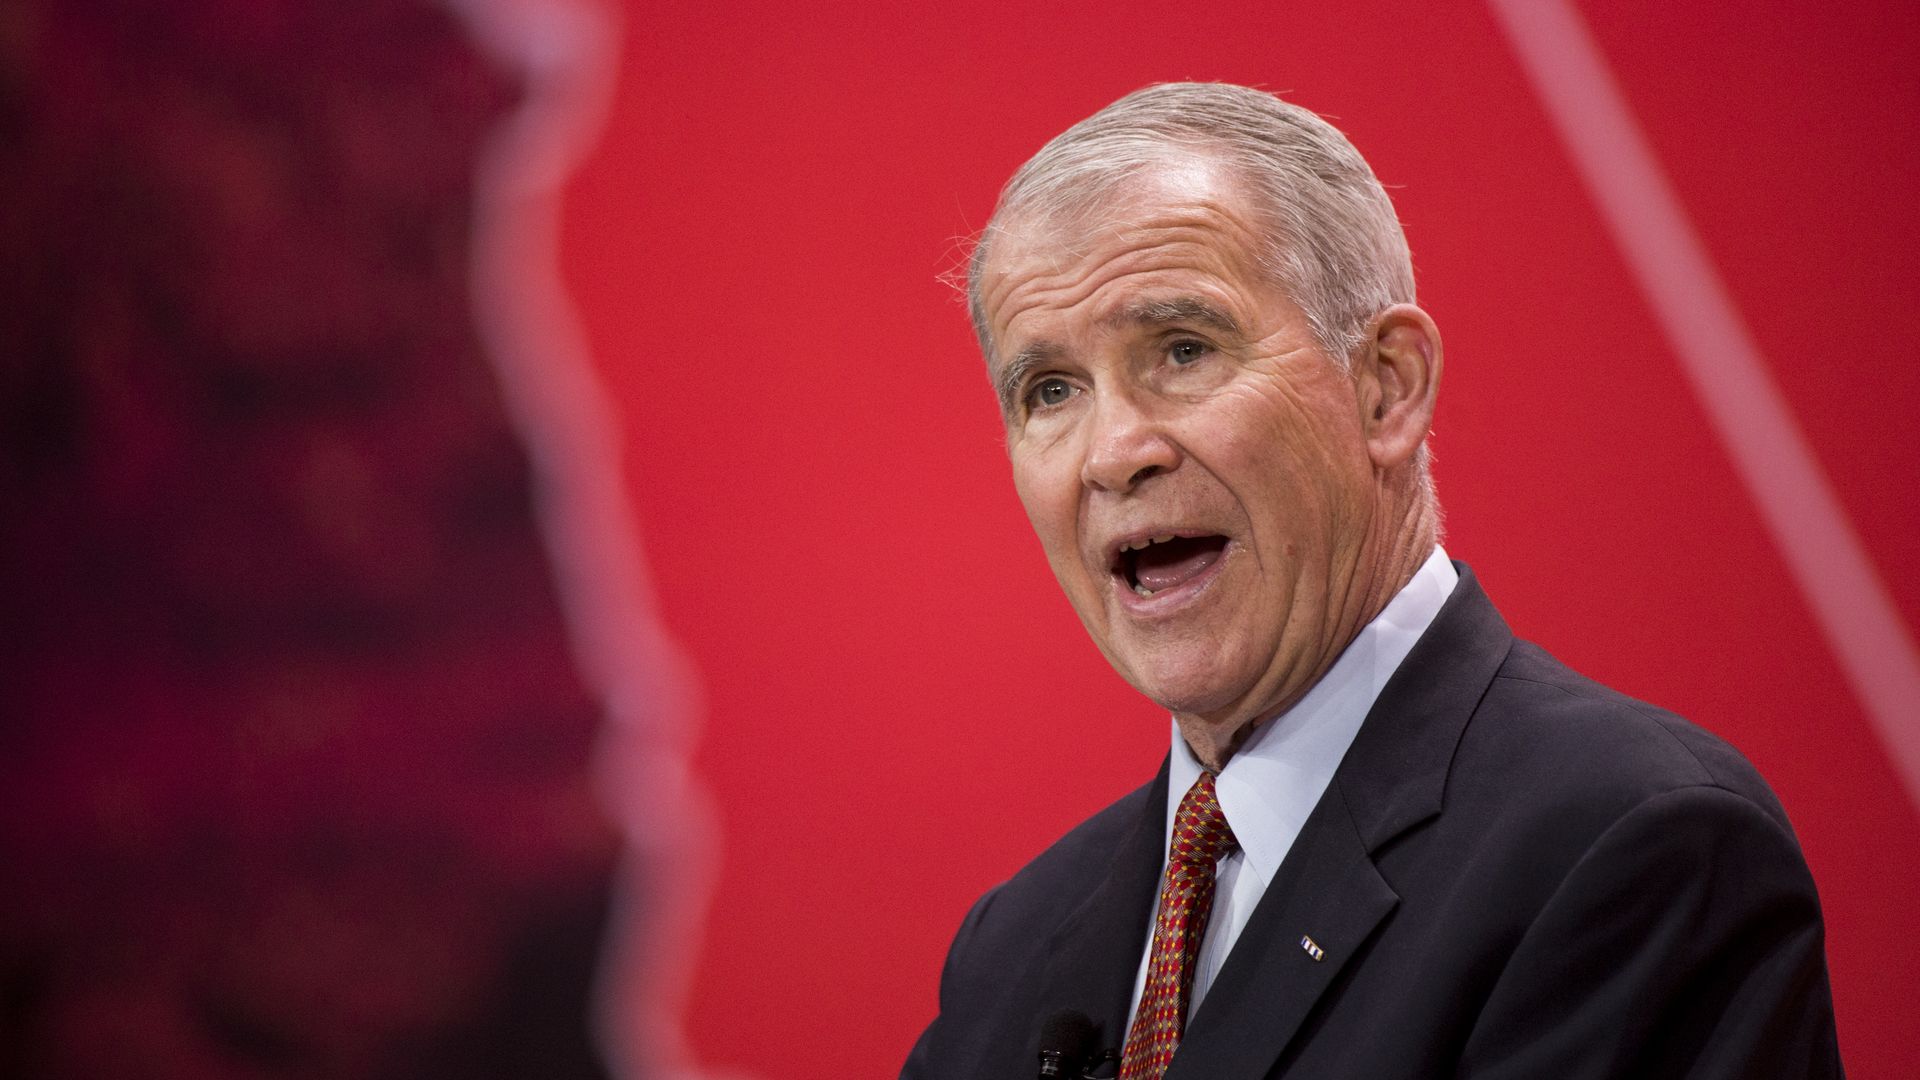 Oliver North speaking before a red background.